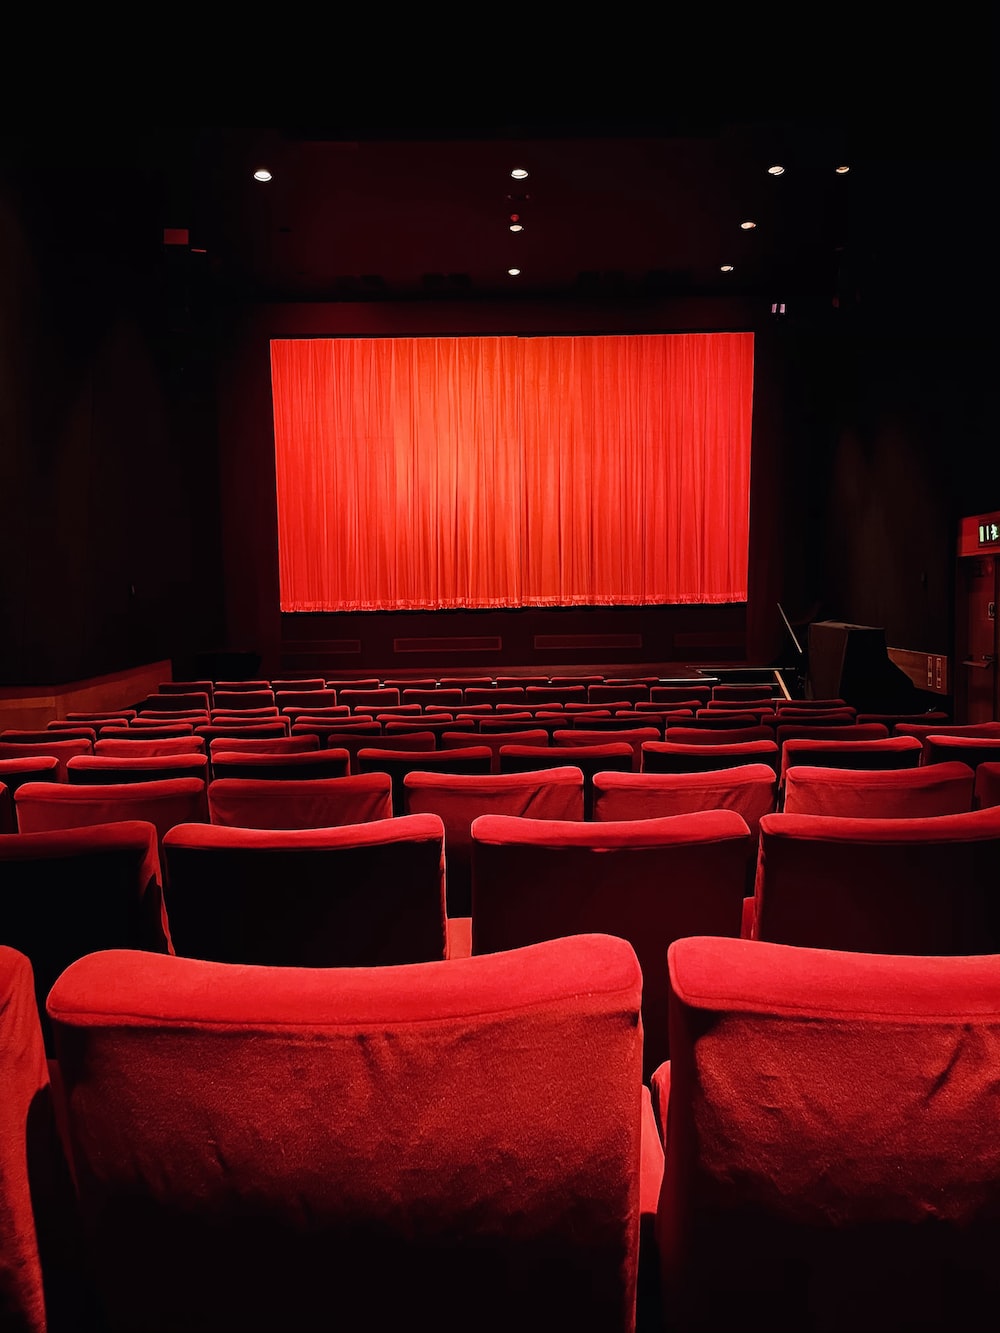 Cinema Room Picture. Download Free Image